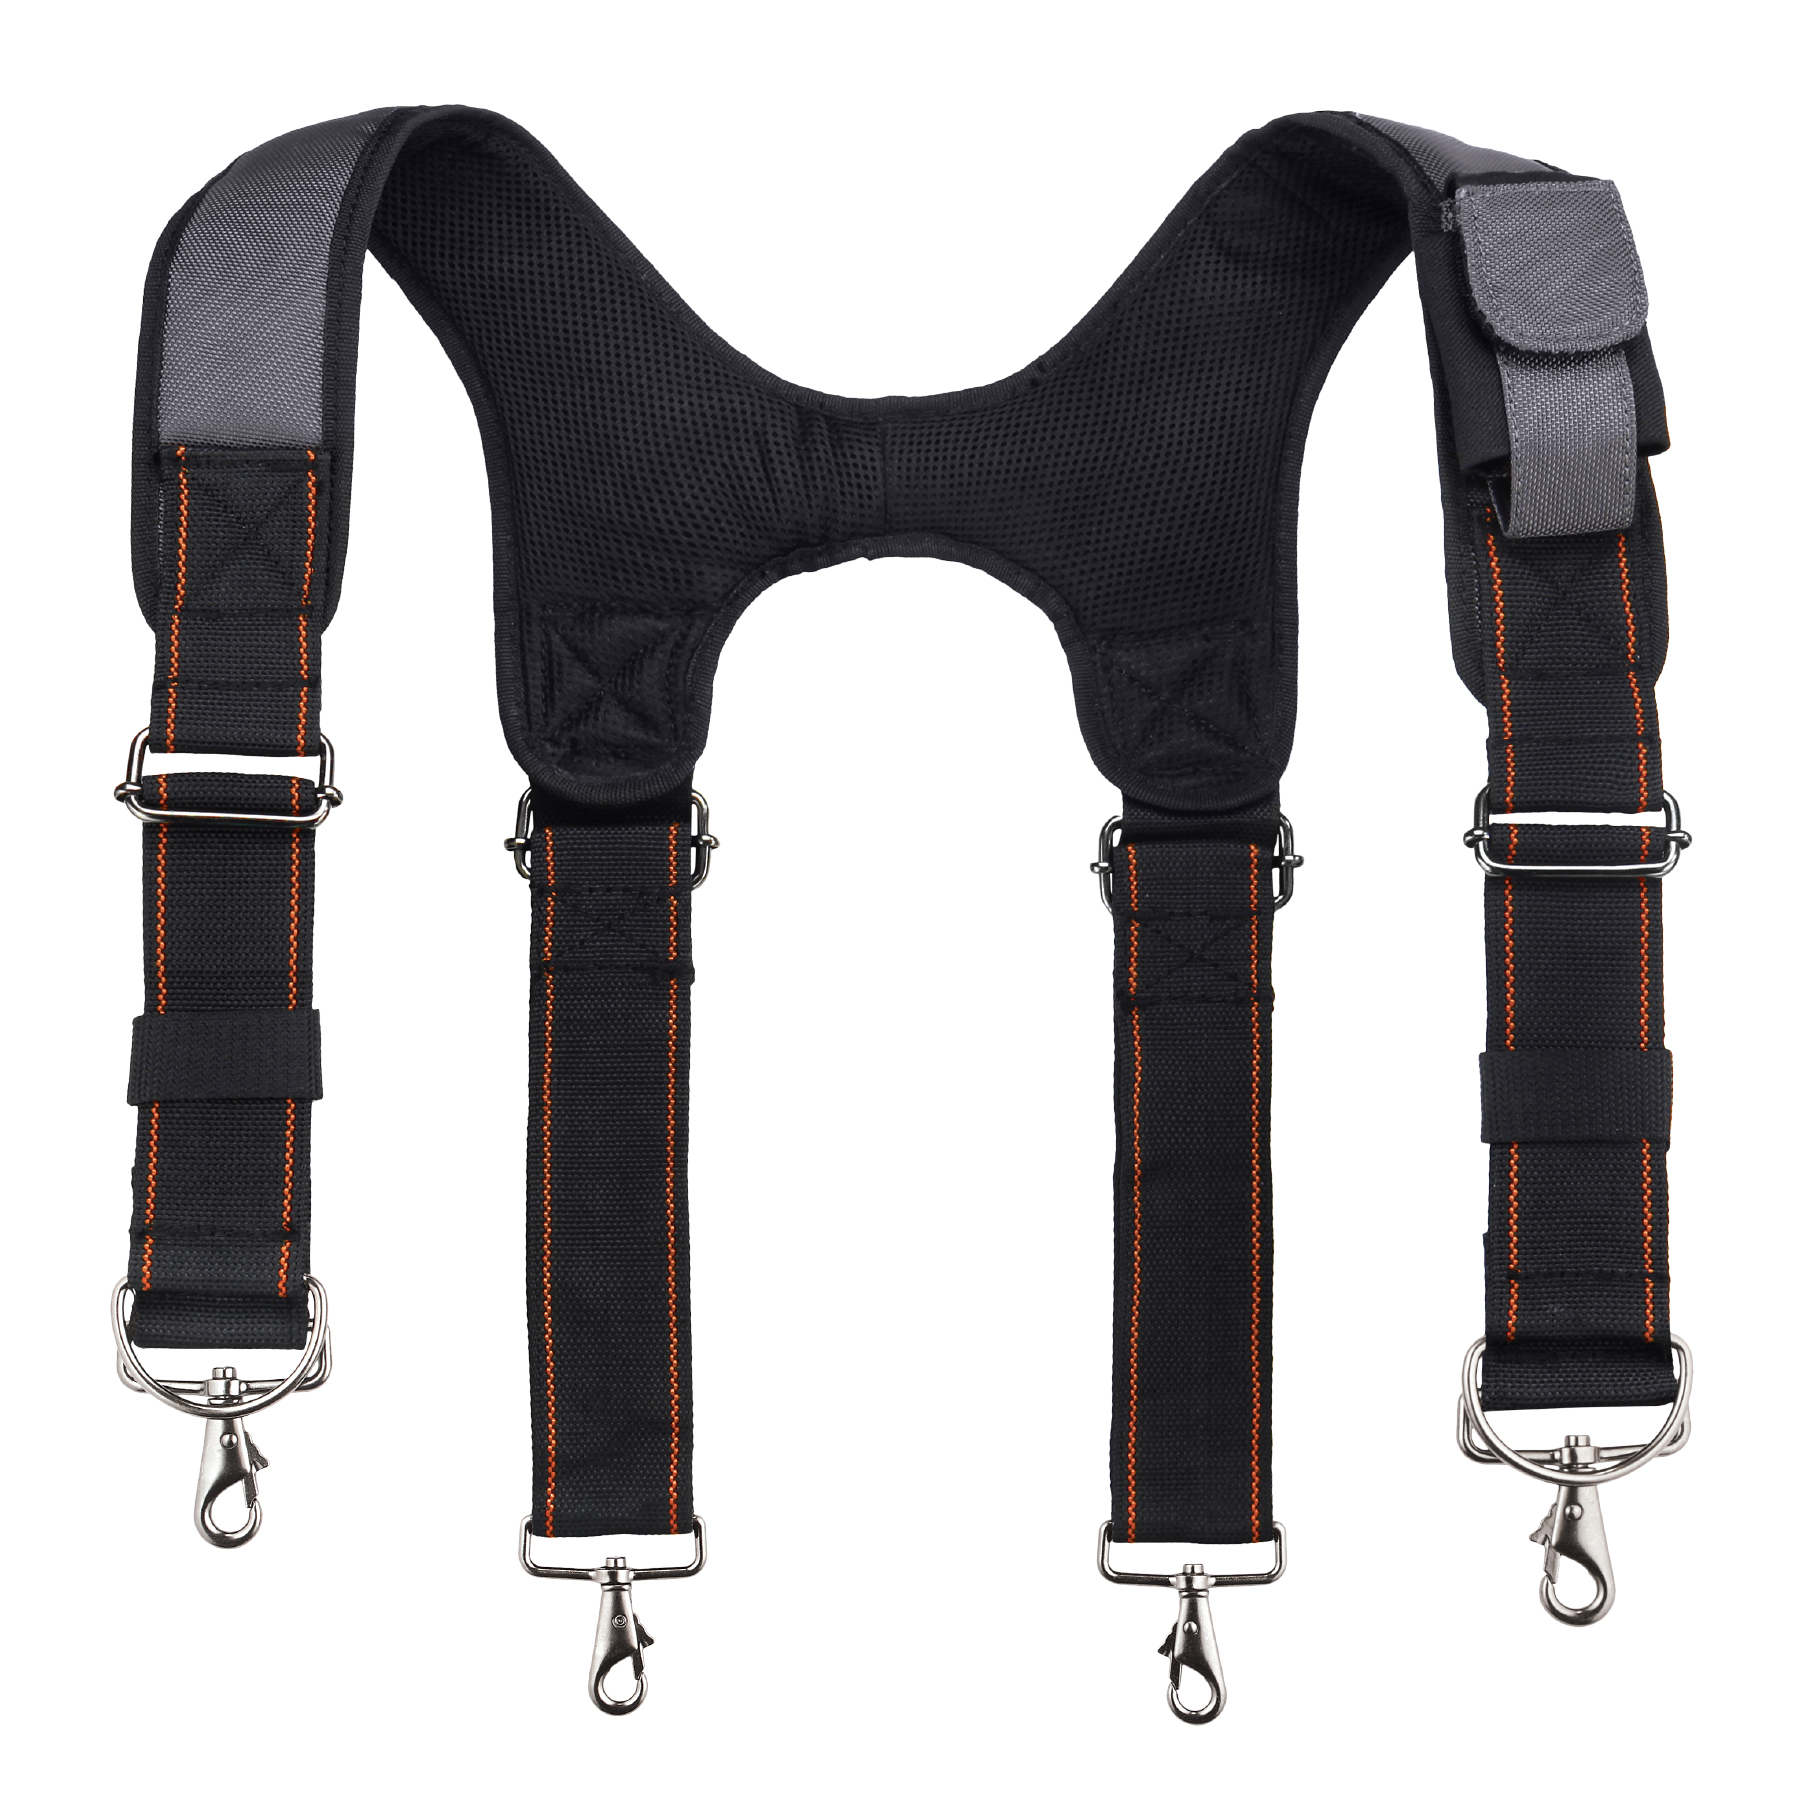 Strong Tool Belt Suspenders Heavy Duty Work For Men With Loop Attachment Clips. 